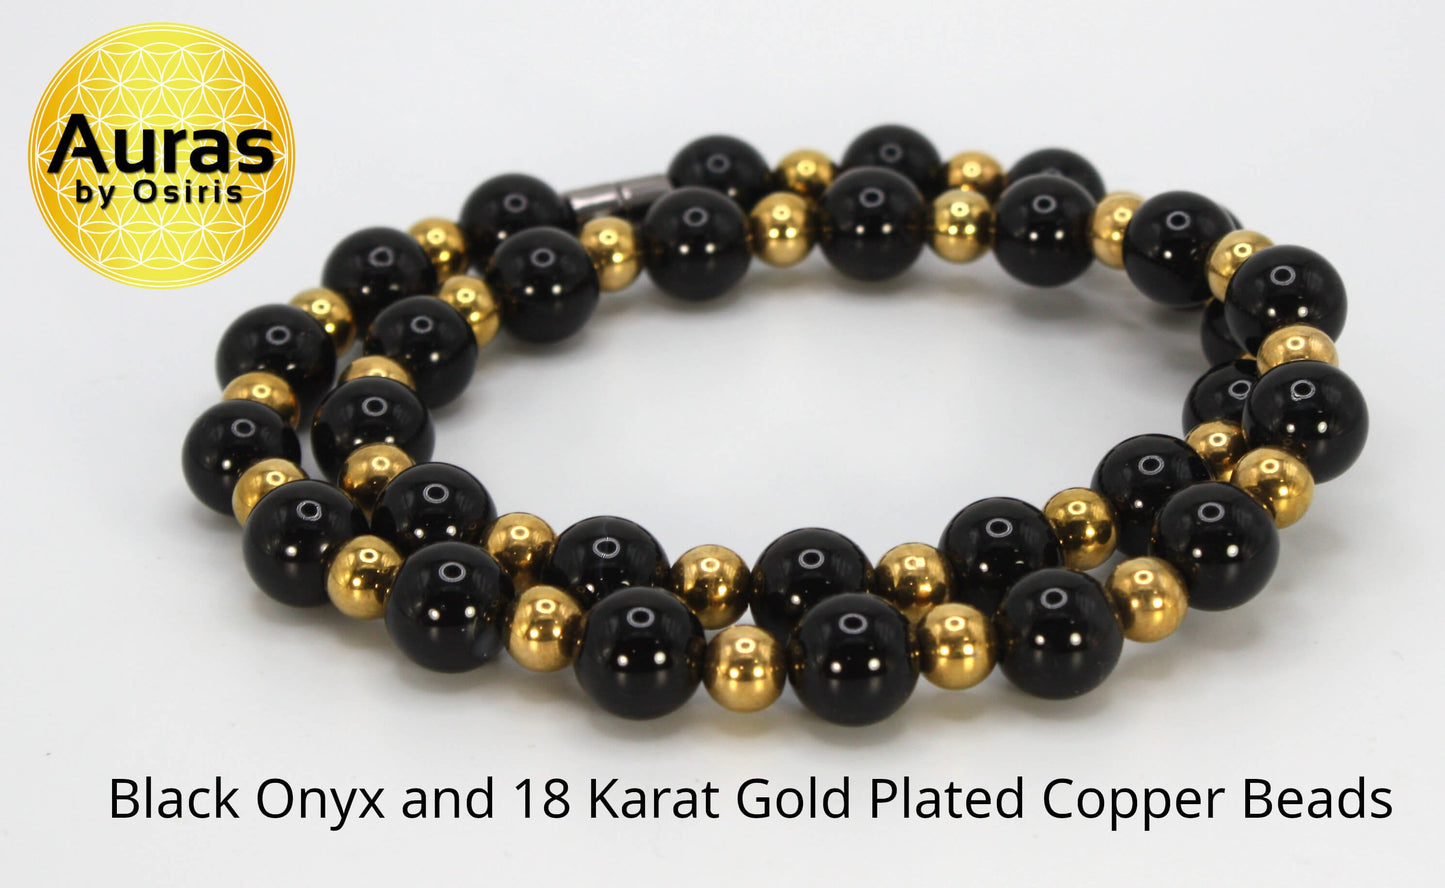 Black Onyx and Gold Necklace For Men/Women - 18k Gold Plated Copper Beads - AAA Genuine Onyx Gemstones   World's Strongest Magnetic Clasp